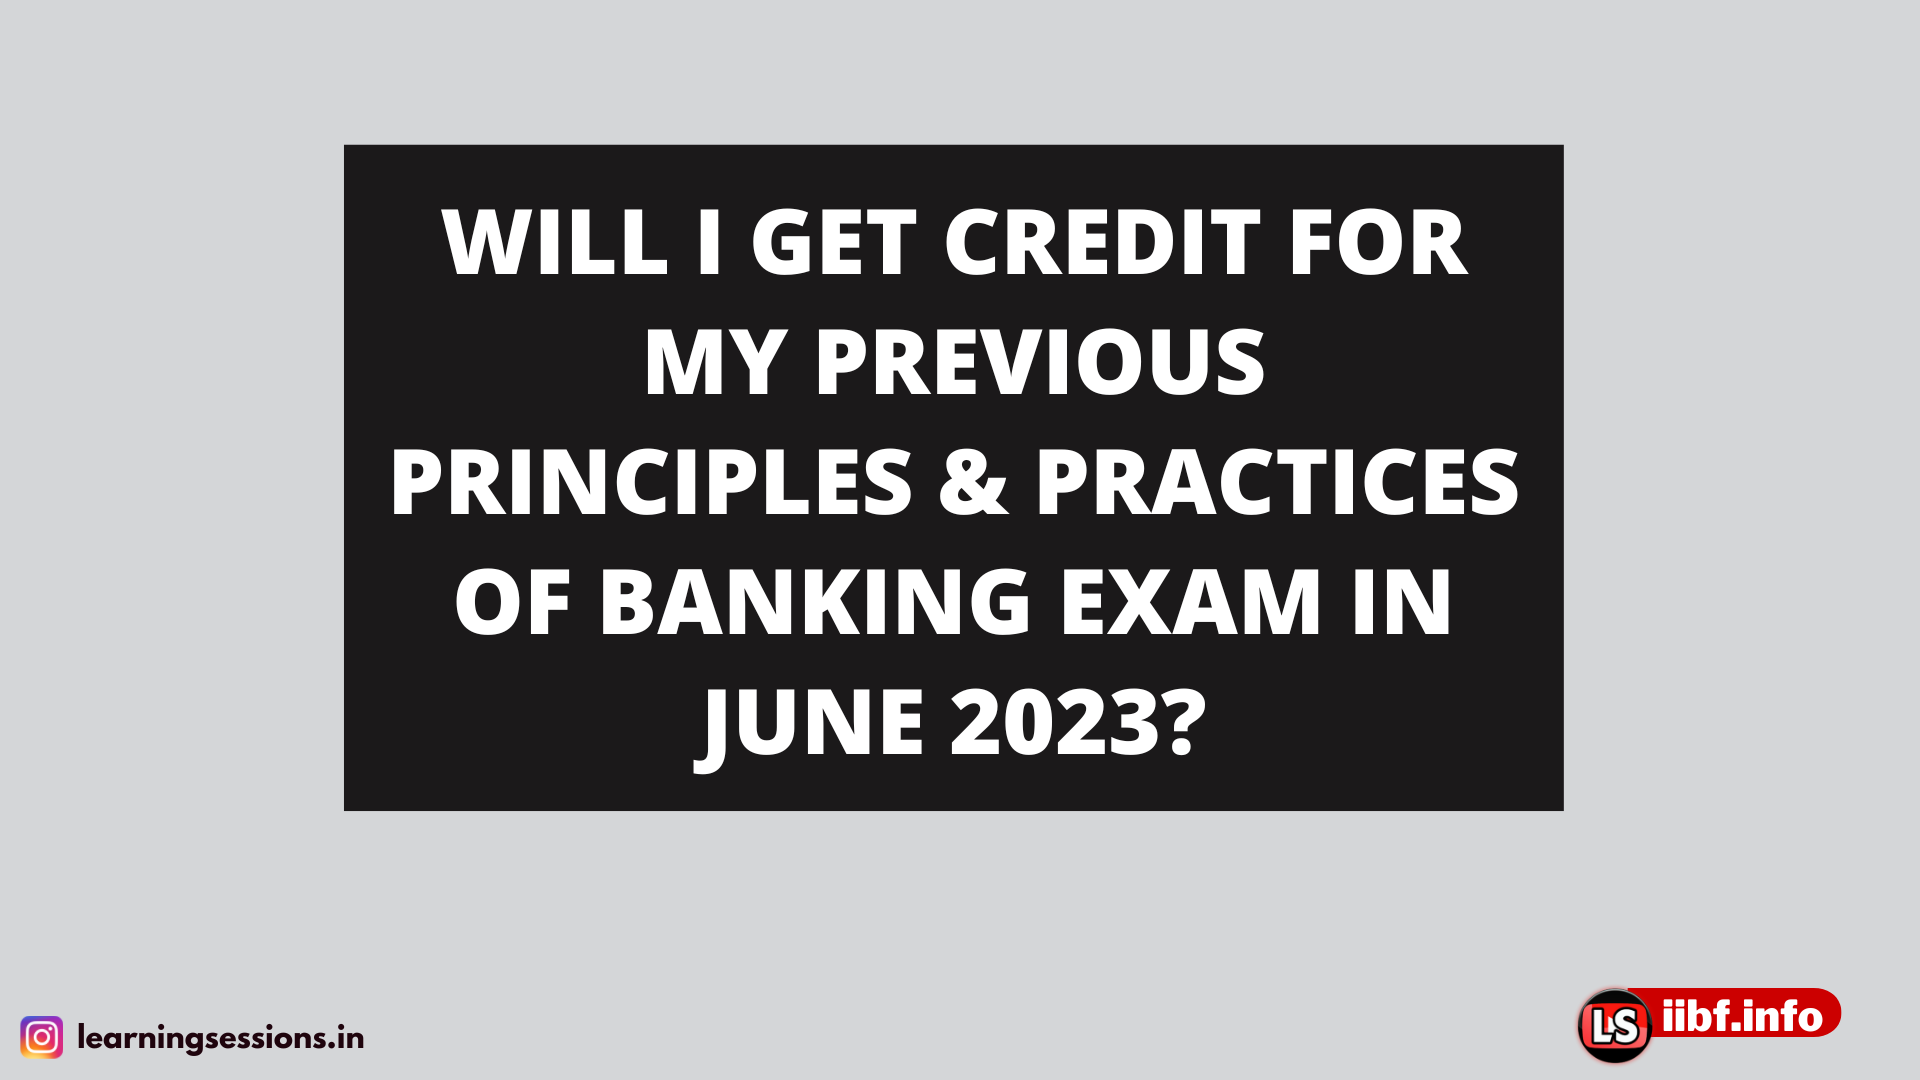 WILL I GET CREDIT FOR MY PREVIOUS PRINCIPLES & PRACTICES OF BANKING EXAM IN JUNE 2023?